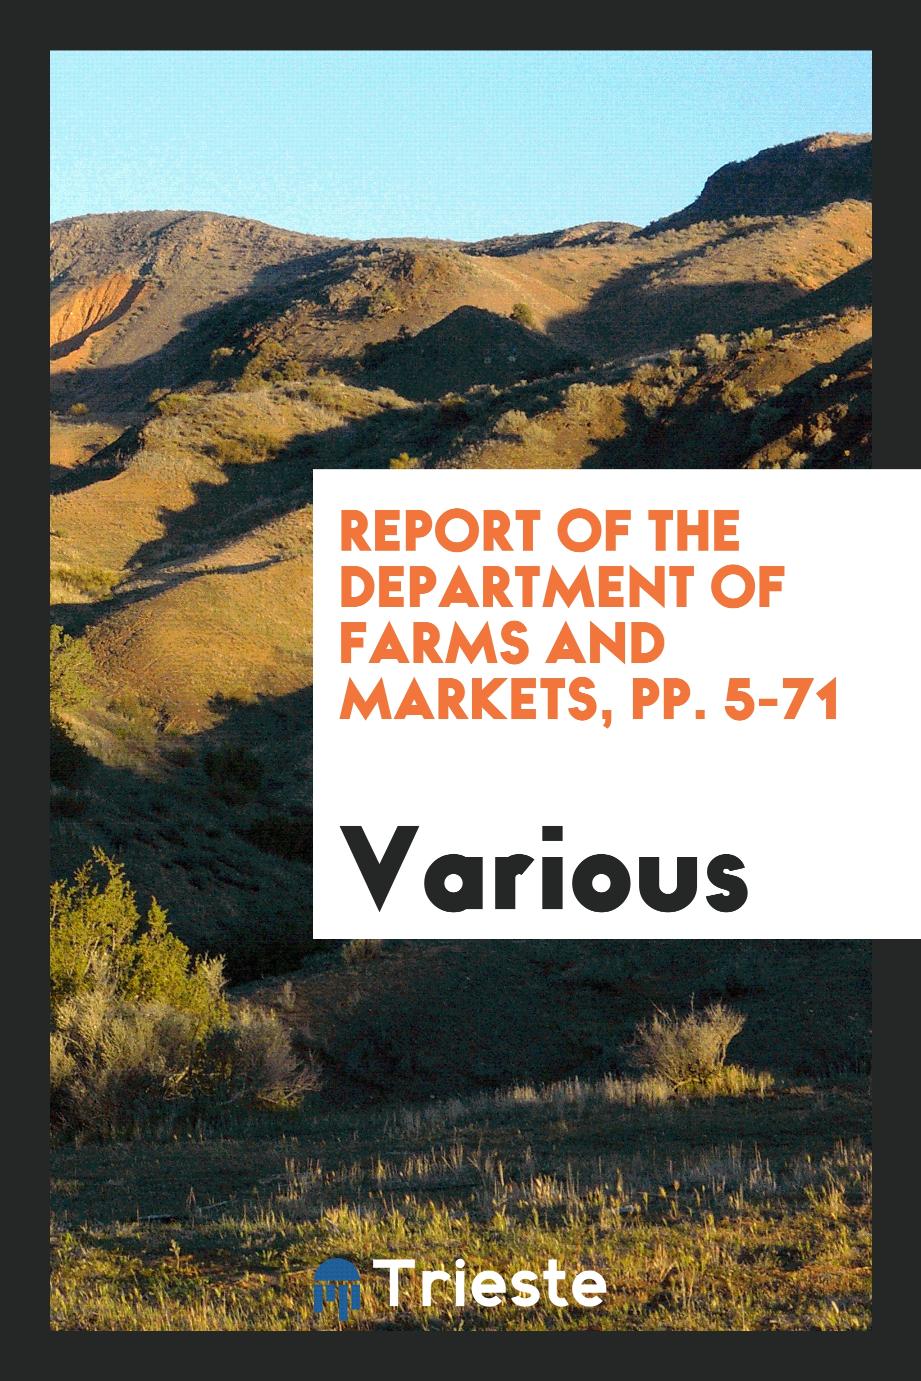 Report of the Department of Farms and Markets, pp. 5-71